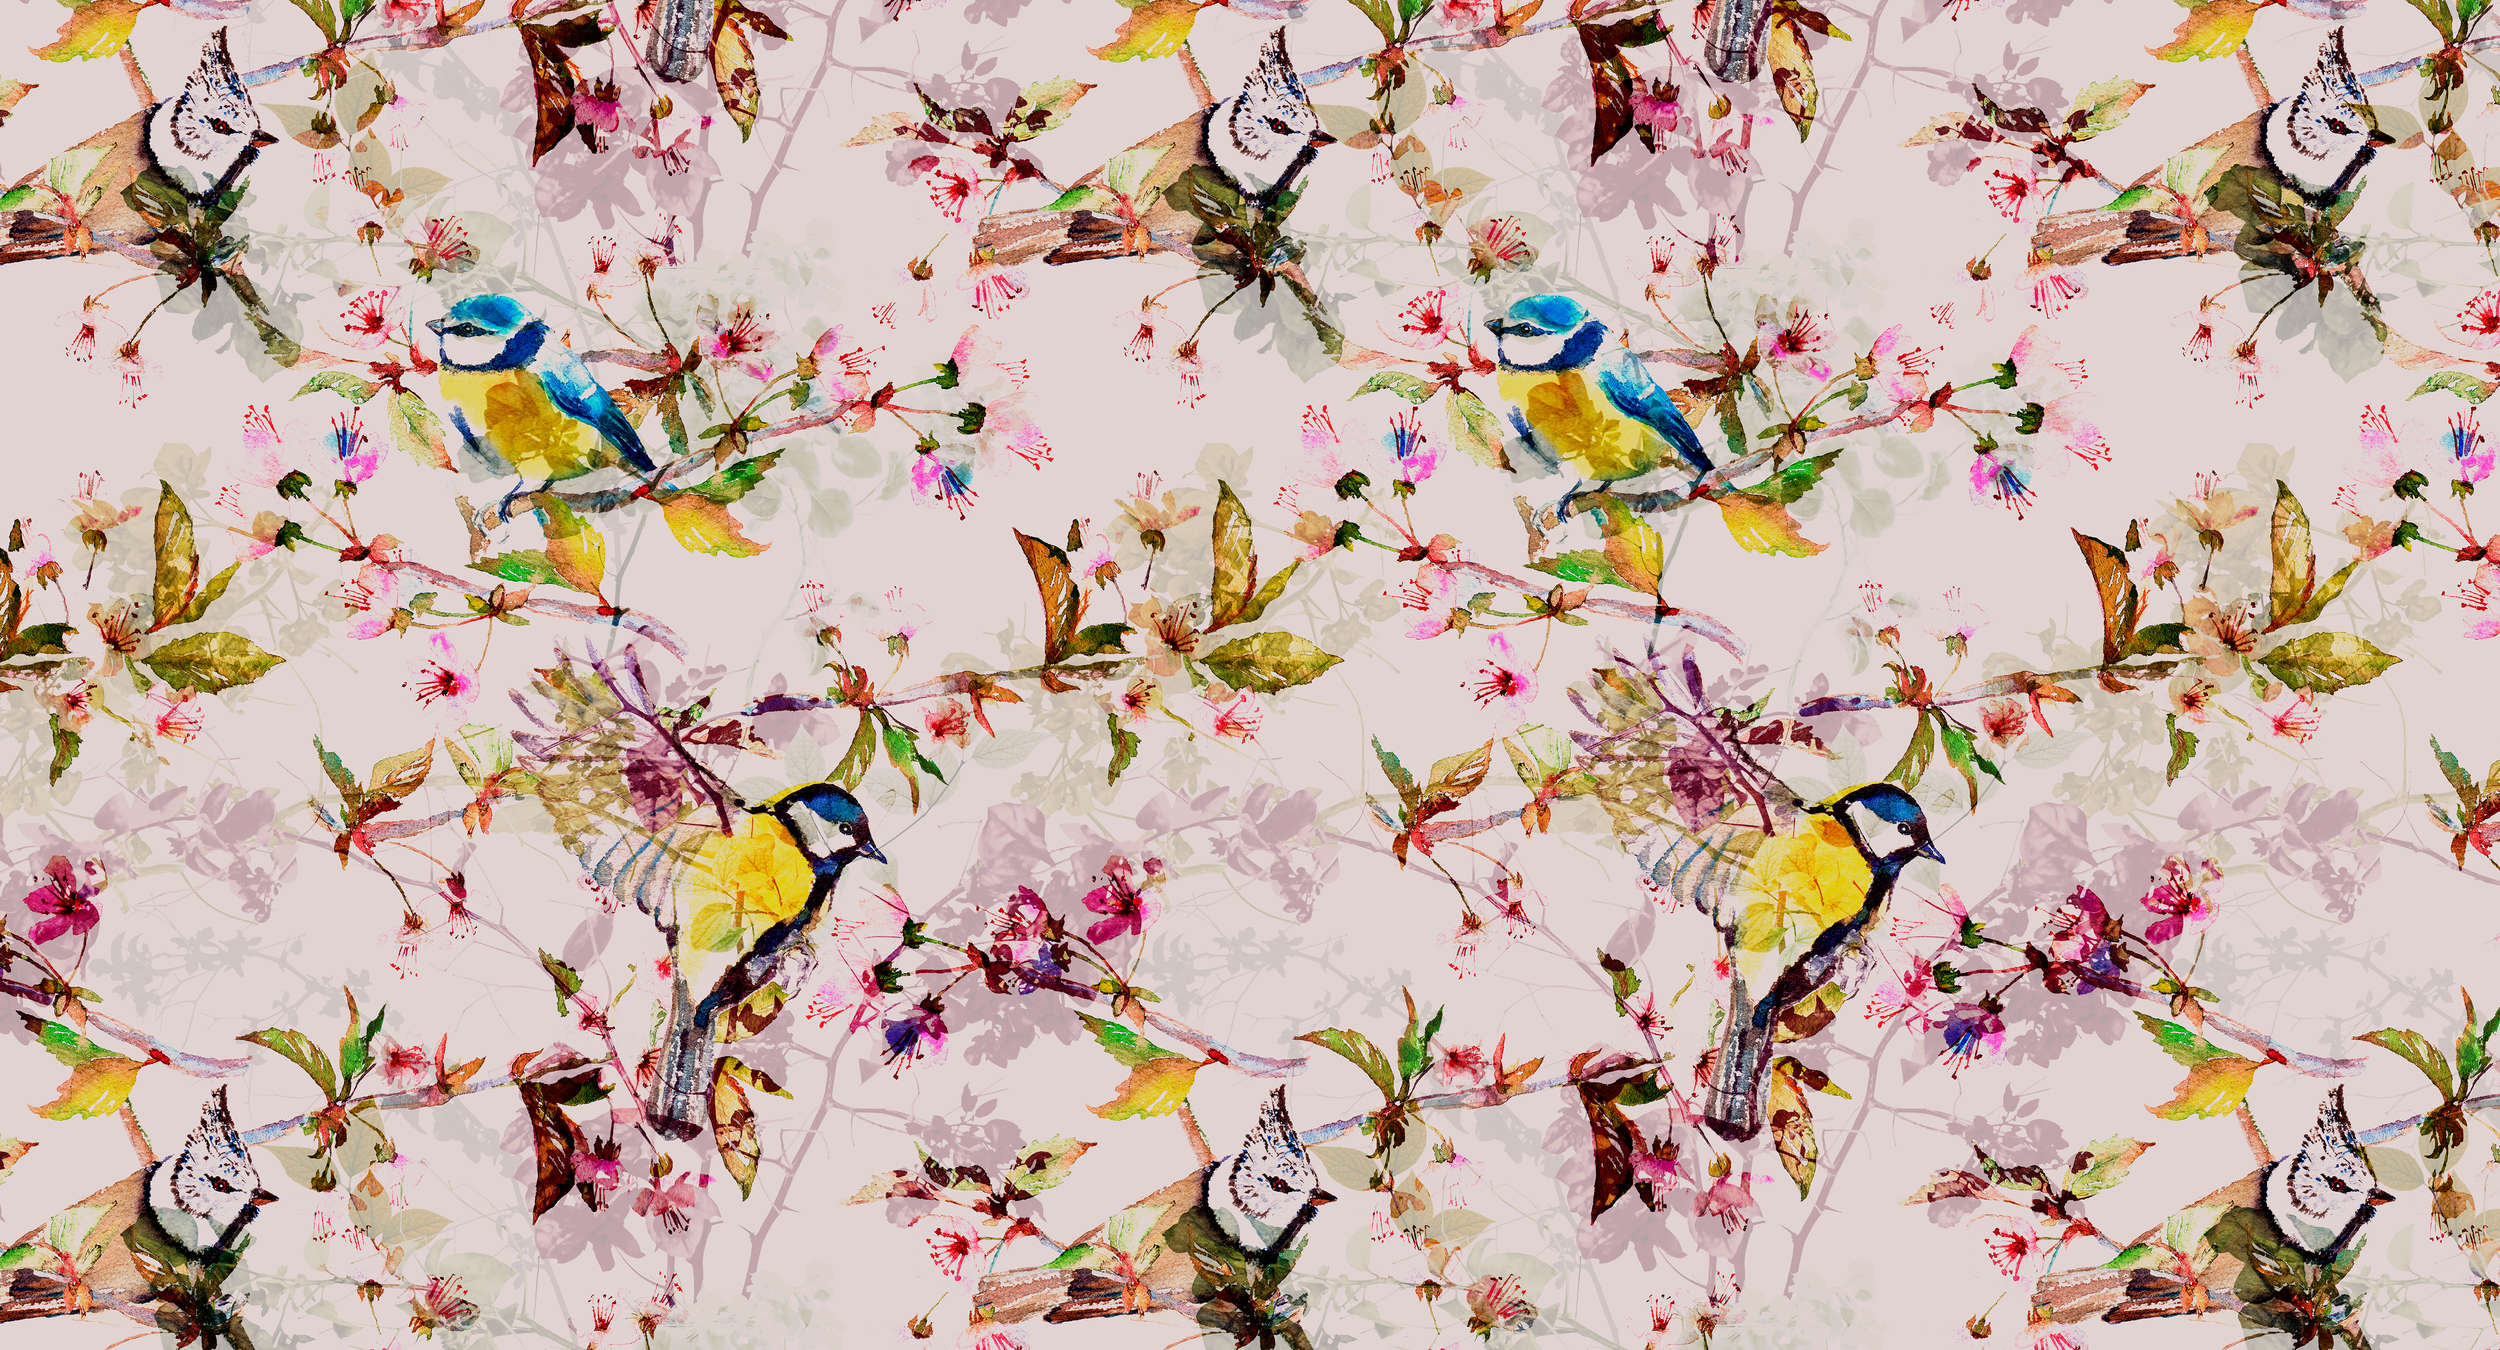             Birds collage style mural - pink, yellow
        